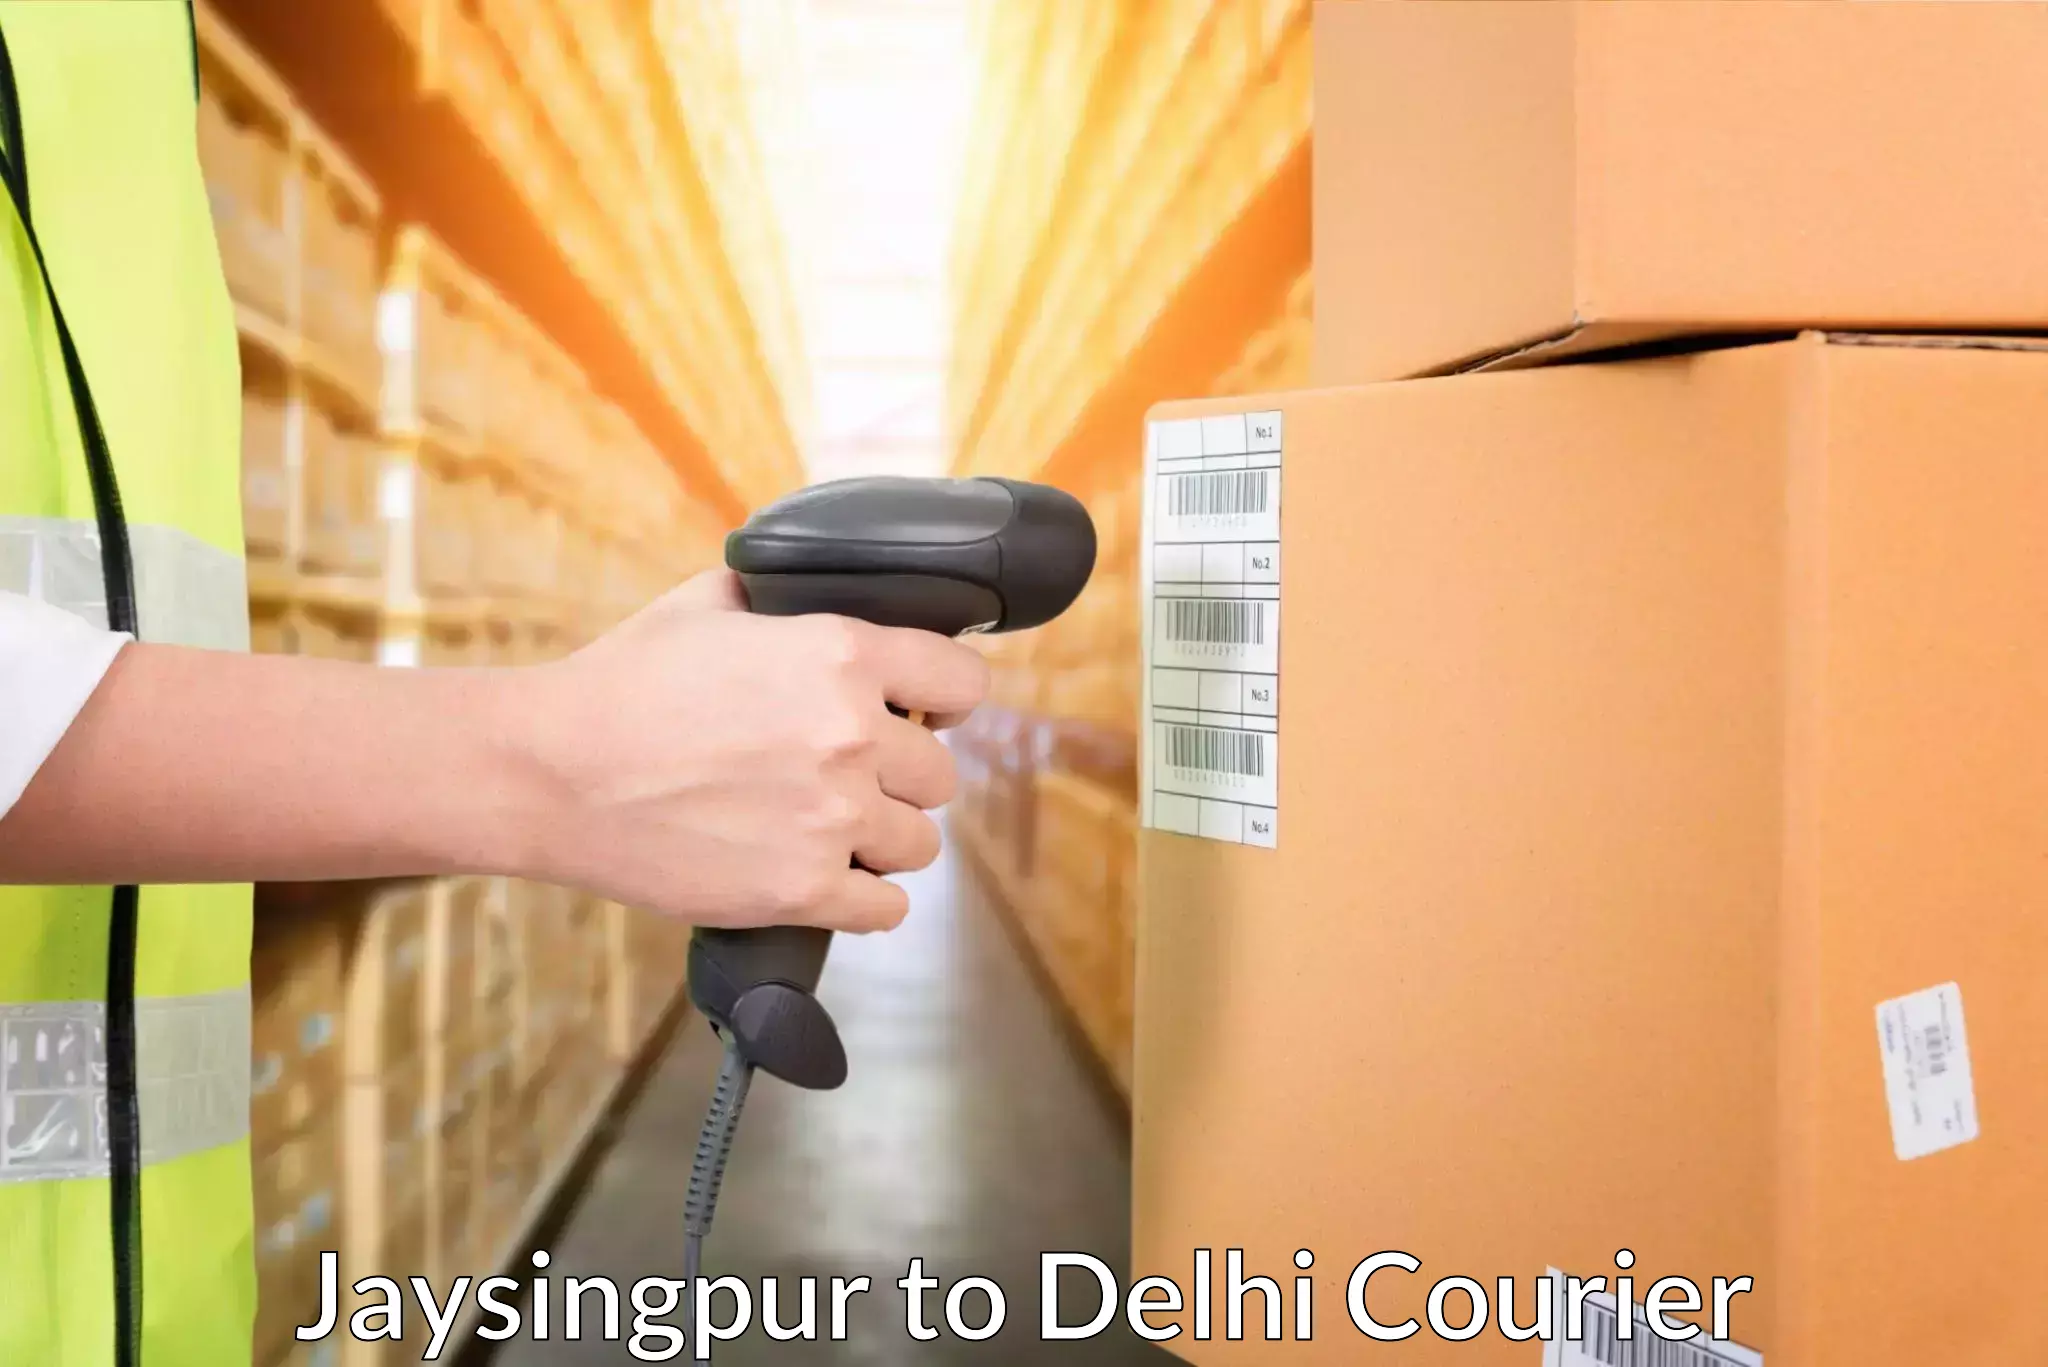 Global shipping solutions Jaysingpur to East Delhi